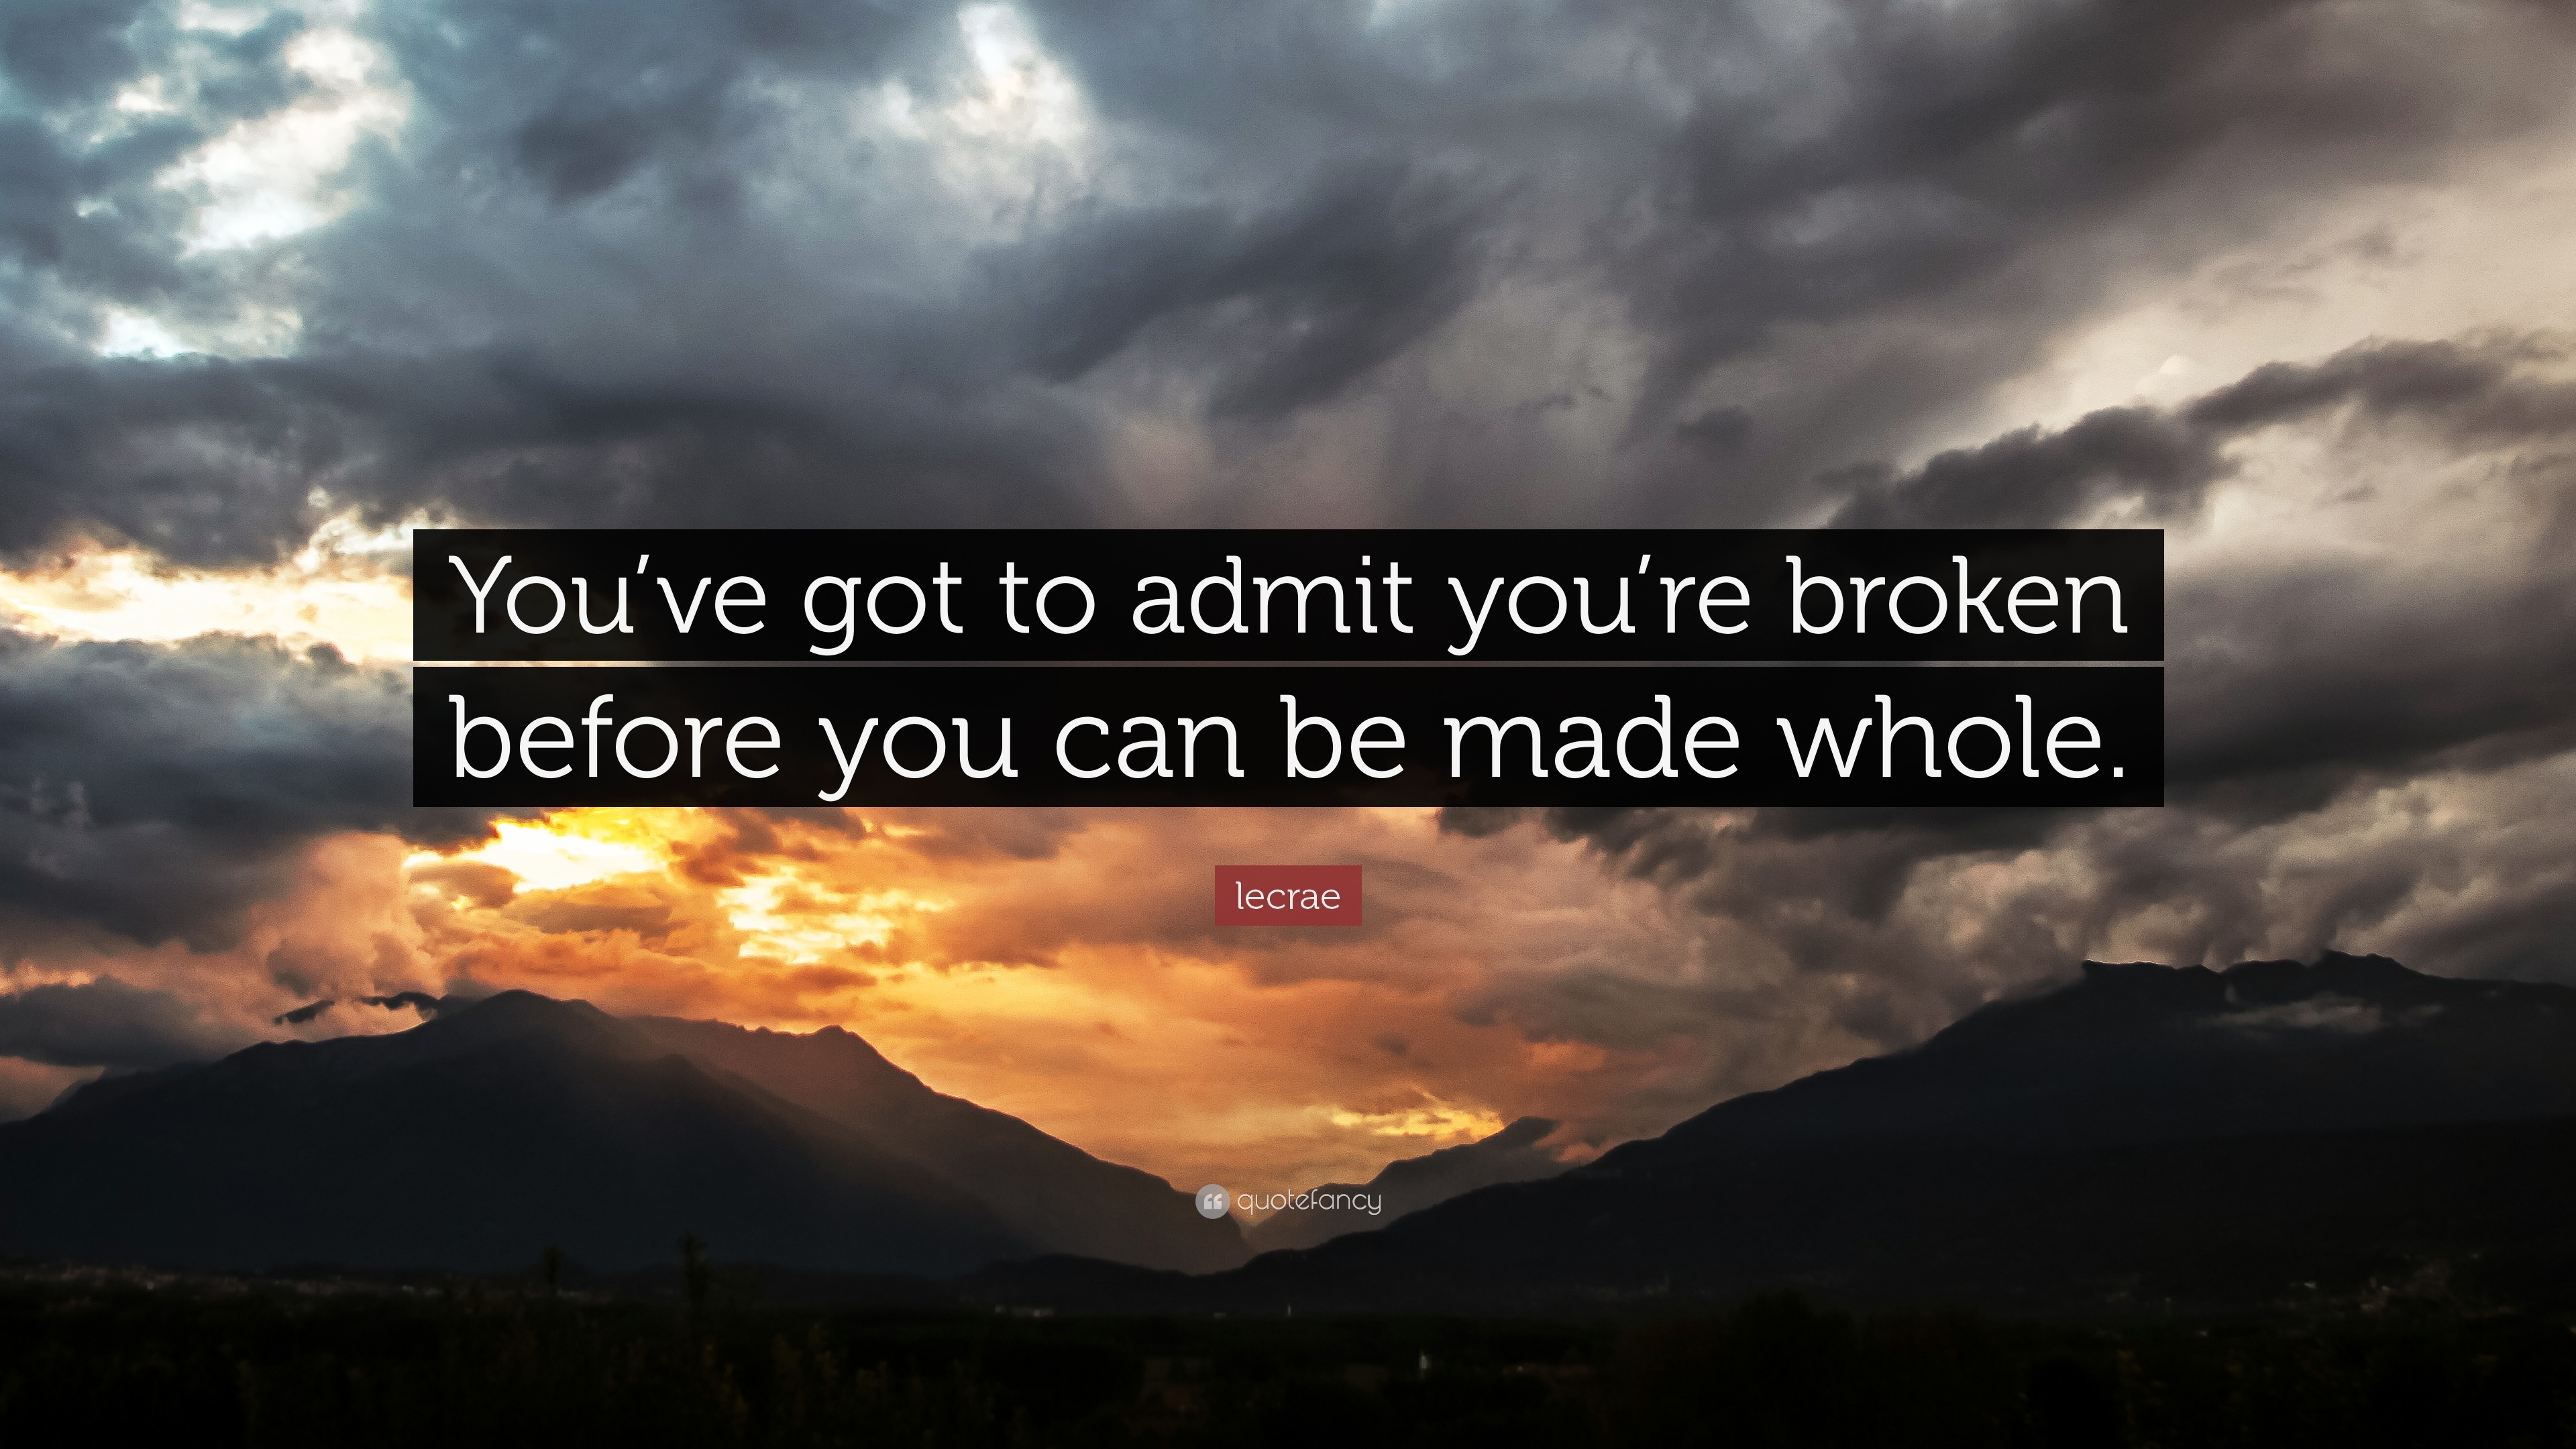 3840x2160 Lecrae Quote: “You've got to admit you're broken before you